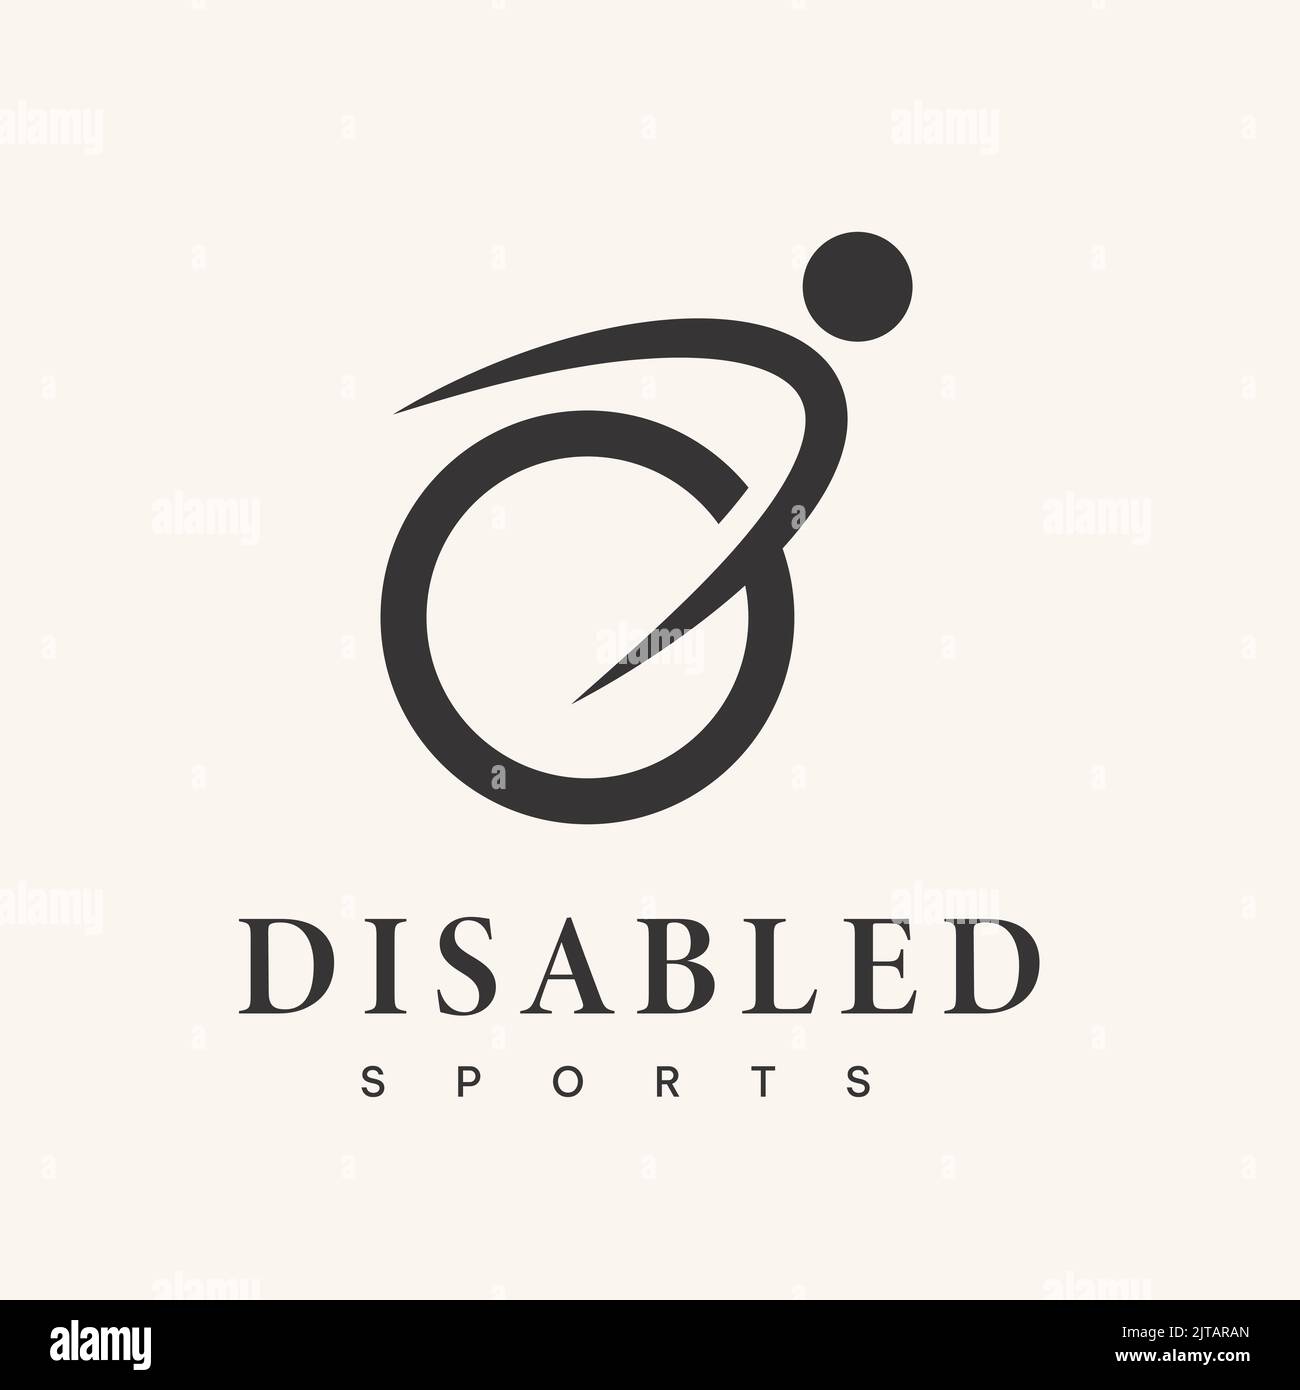 Inspiration wheelchair logo design for people with disabilities fast sports symbol. Simple modern design logo illustration. Stock Vector